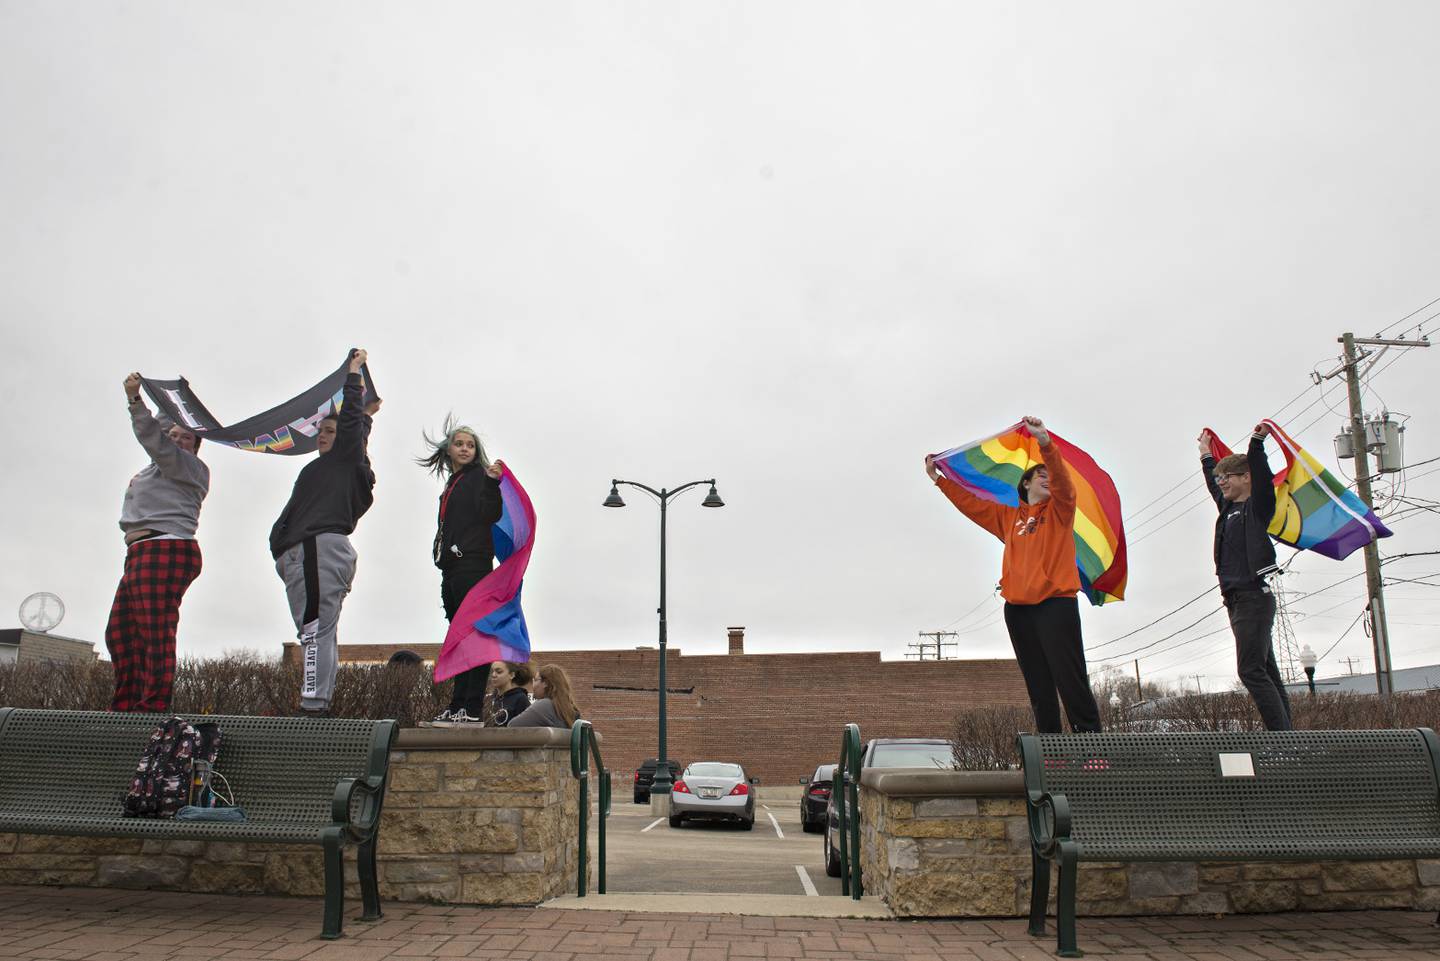 Nikelle Bassford (left), 18, Sky West, 16, Emily Allen, 16, Bailey Bramm, 16 and Kayden Carter, 15, display gay pride flags and chants as a show of disdain at the assault of Carter early this week at Dixon High School.